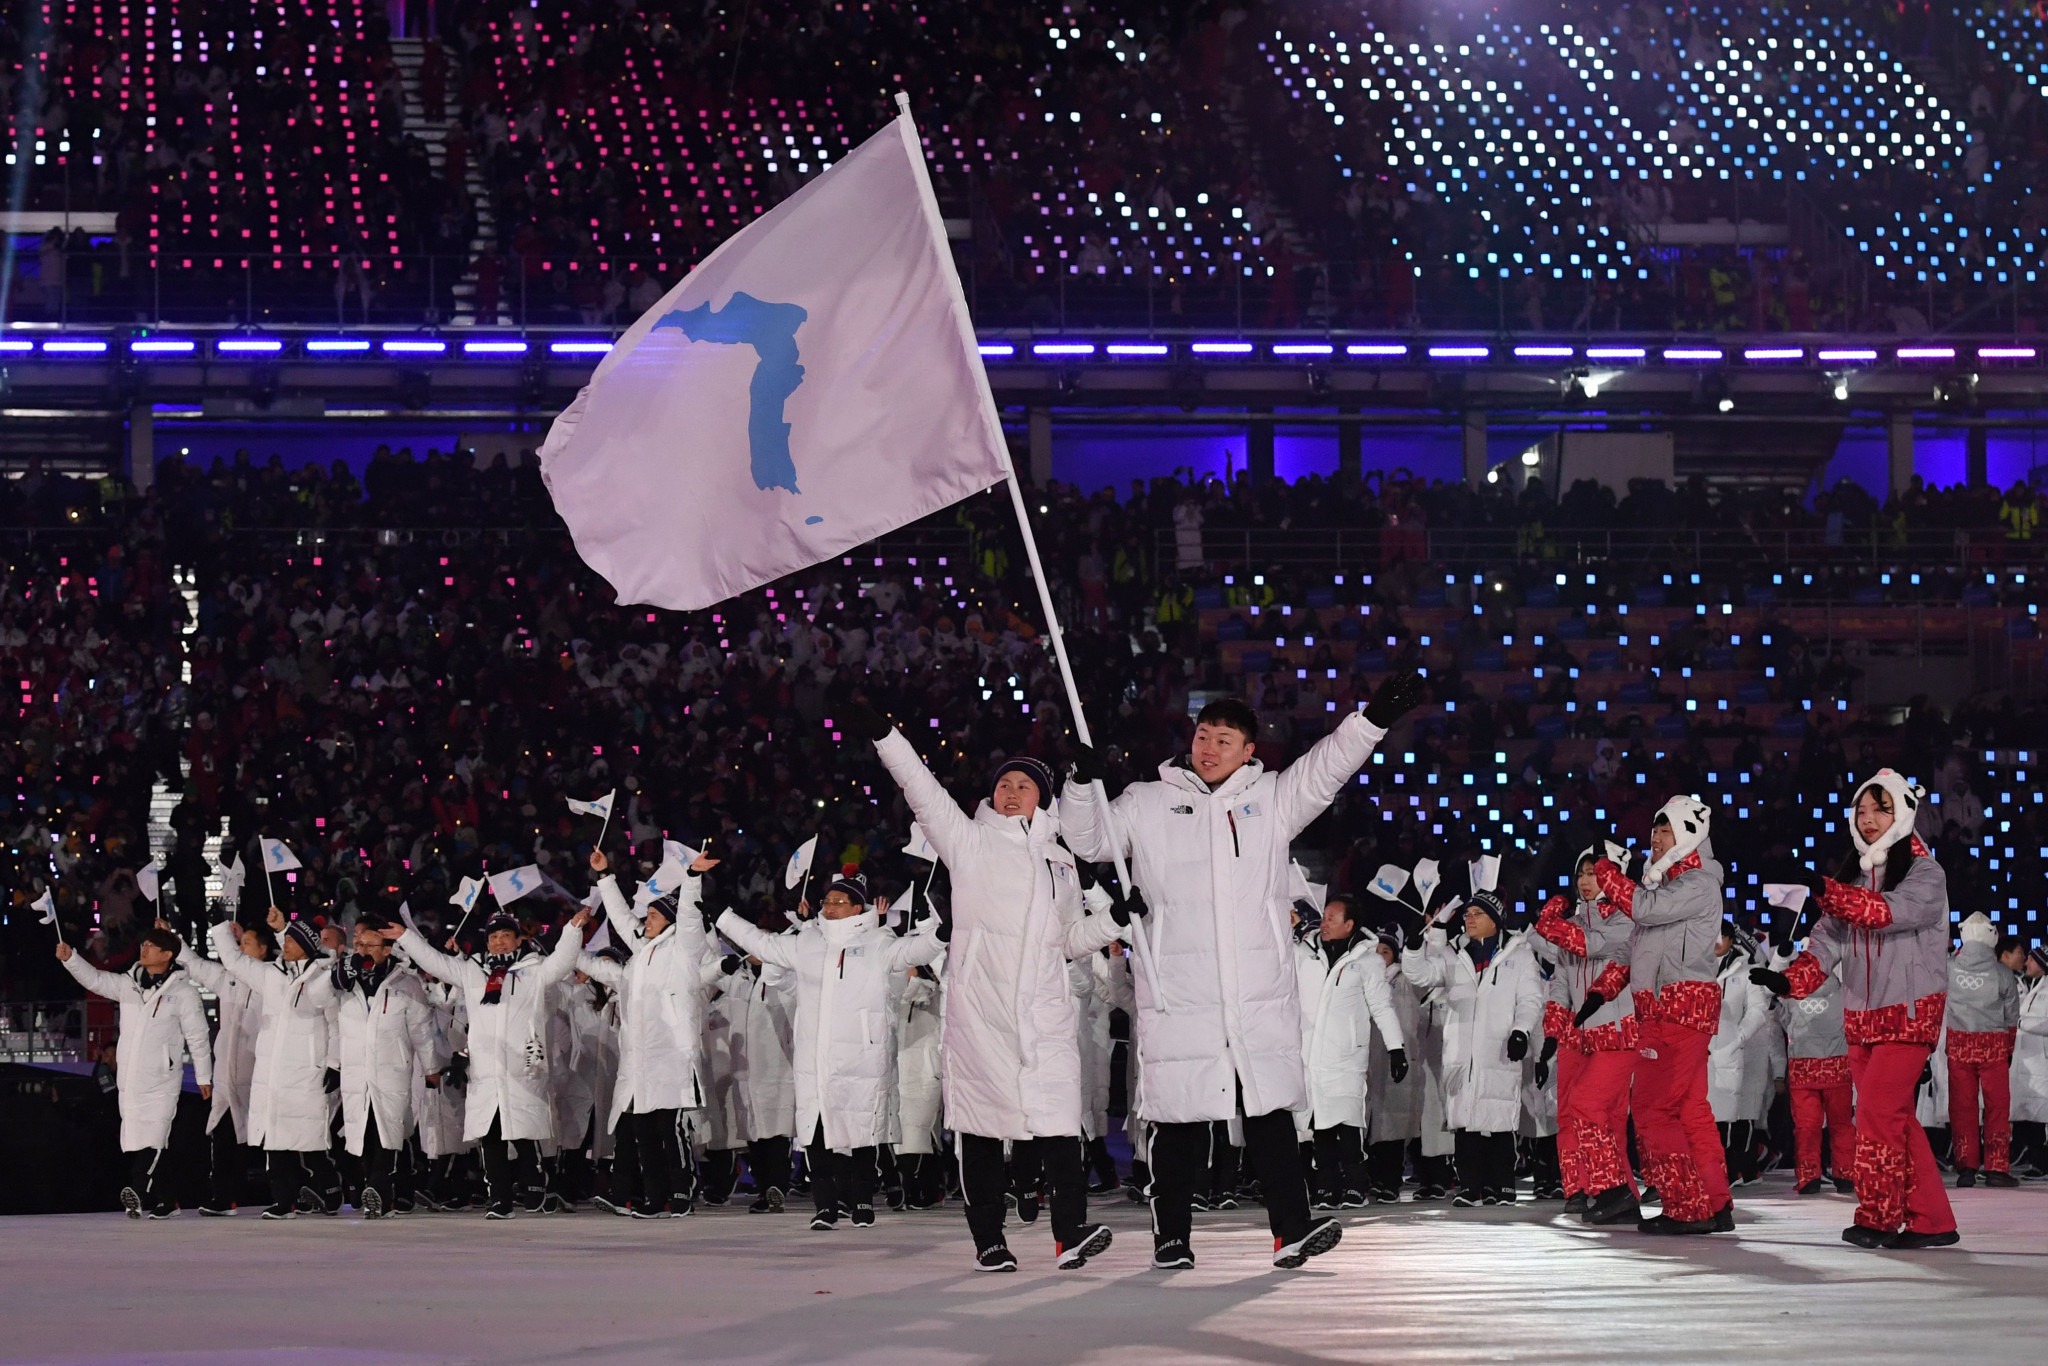 The two Koreas marched together under a unified flag at the Opening Ceremony of the Winter Olympic Games ©Getty Images